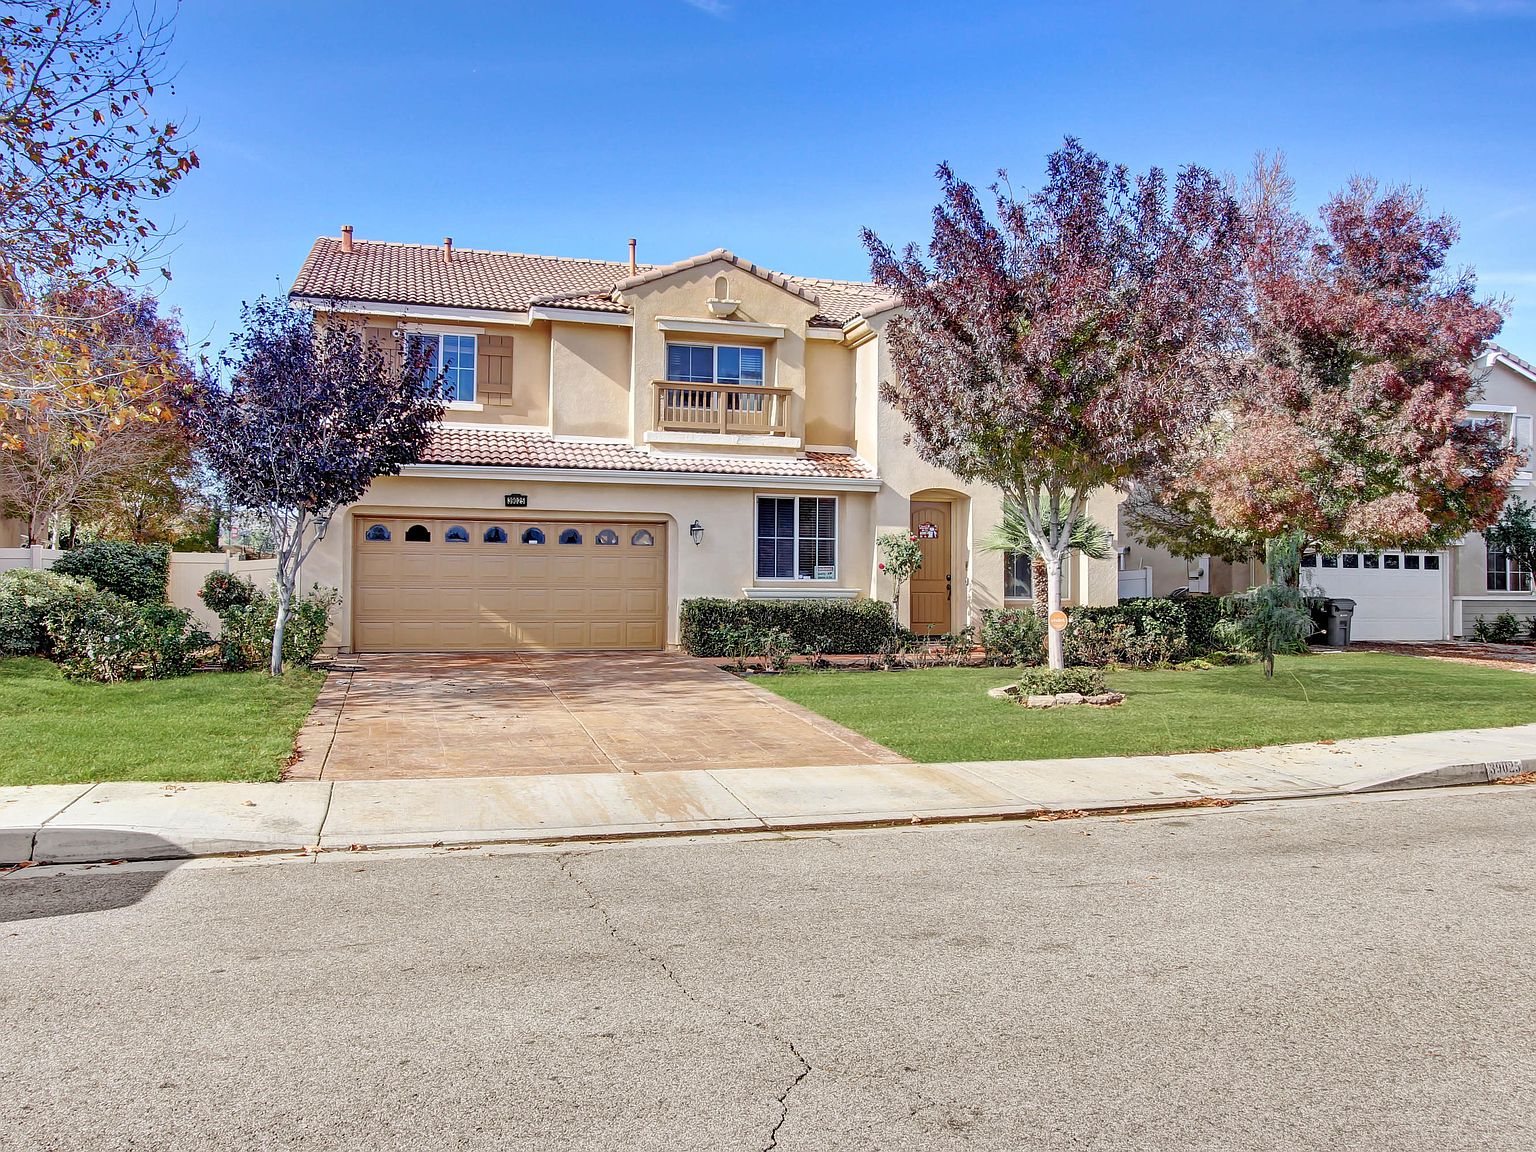 39025 Pacific Highland St, Palmdale, CA 93551 | Zillow